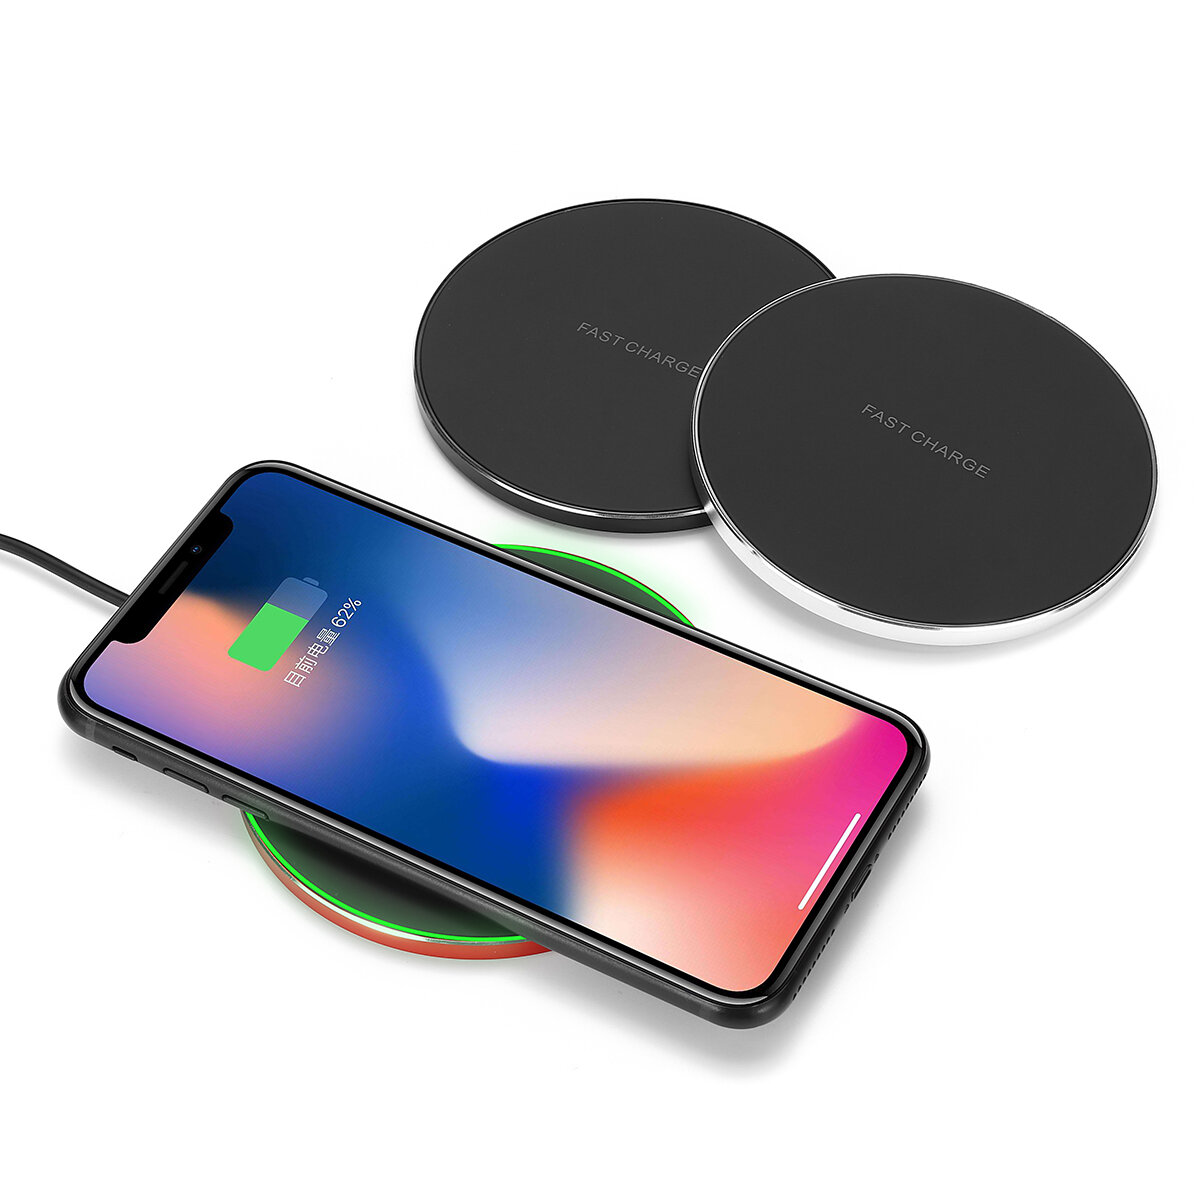 Bakeey Aluminum QI Wireless Fast Charger Charging Dock Pad Mat Phone For iPhone XS XR X, Banggood  - buy with discount